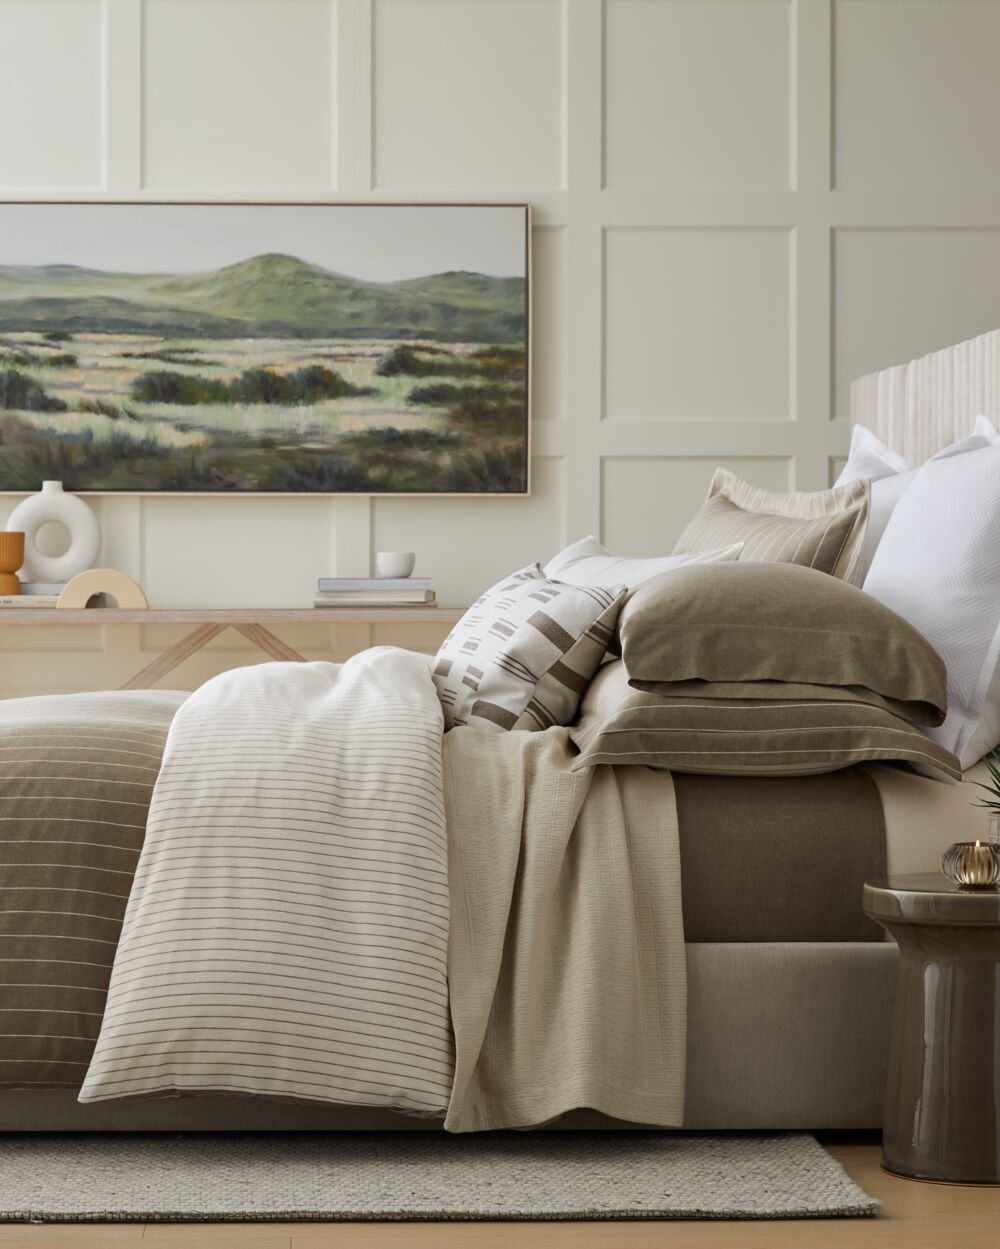 How to design a dreamy neutral bedroom